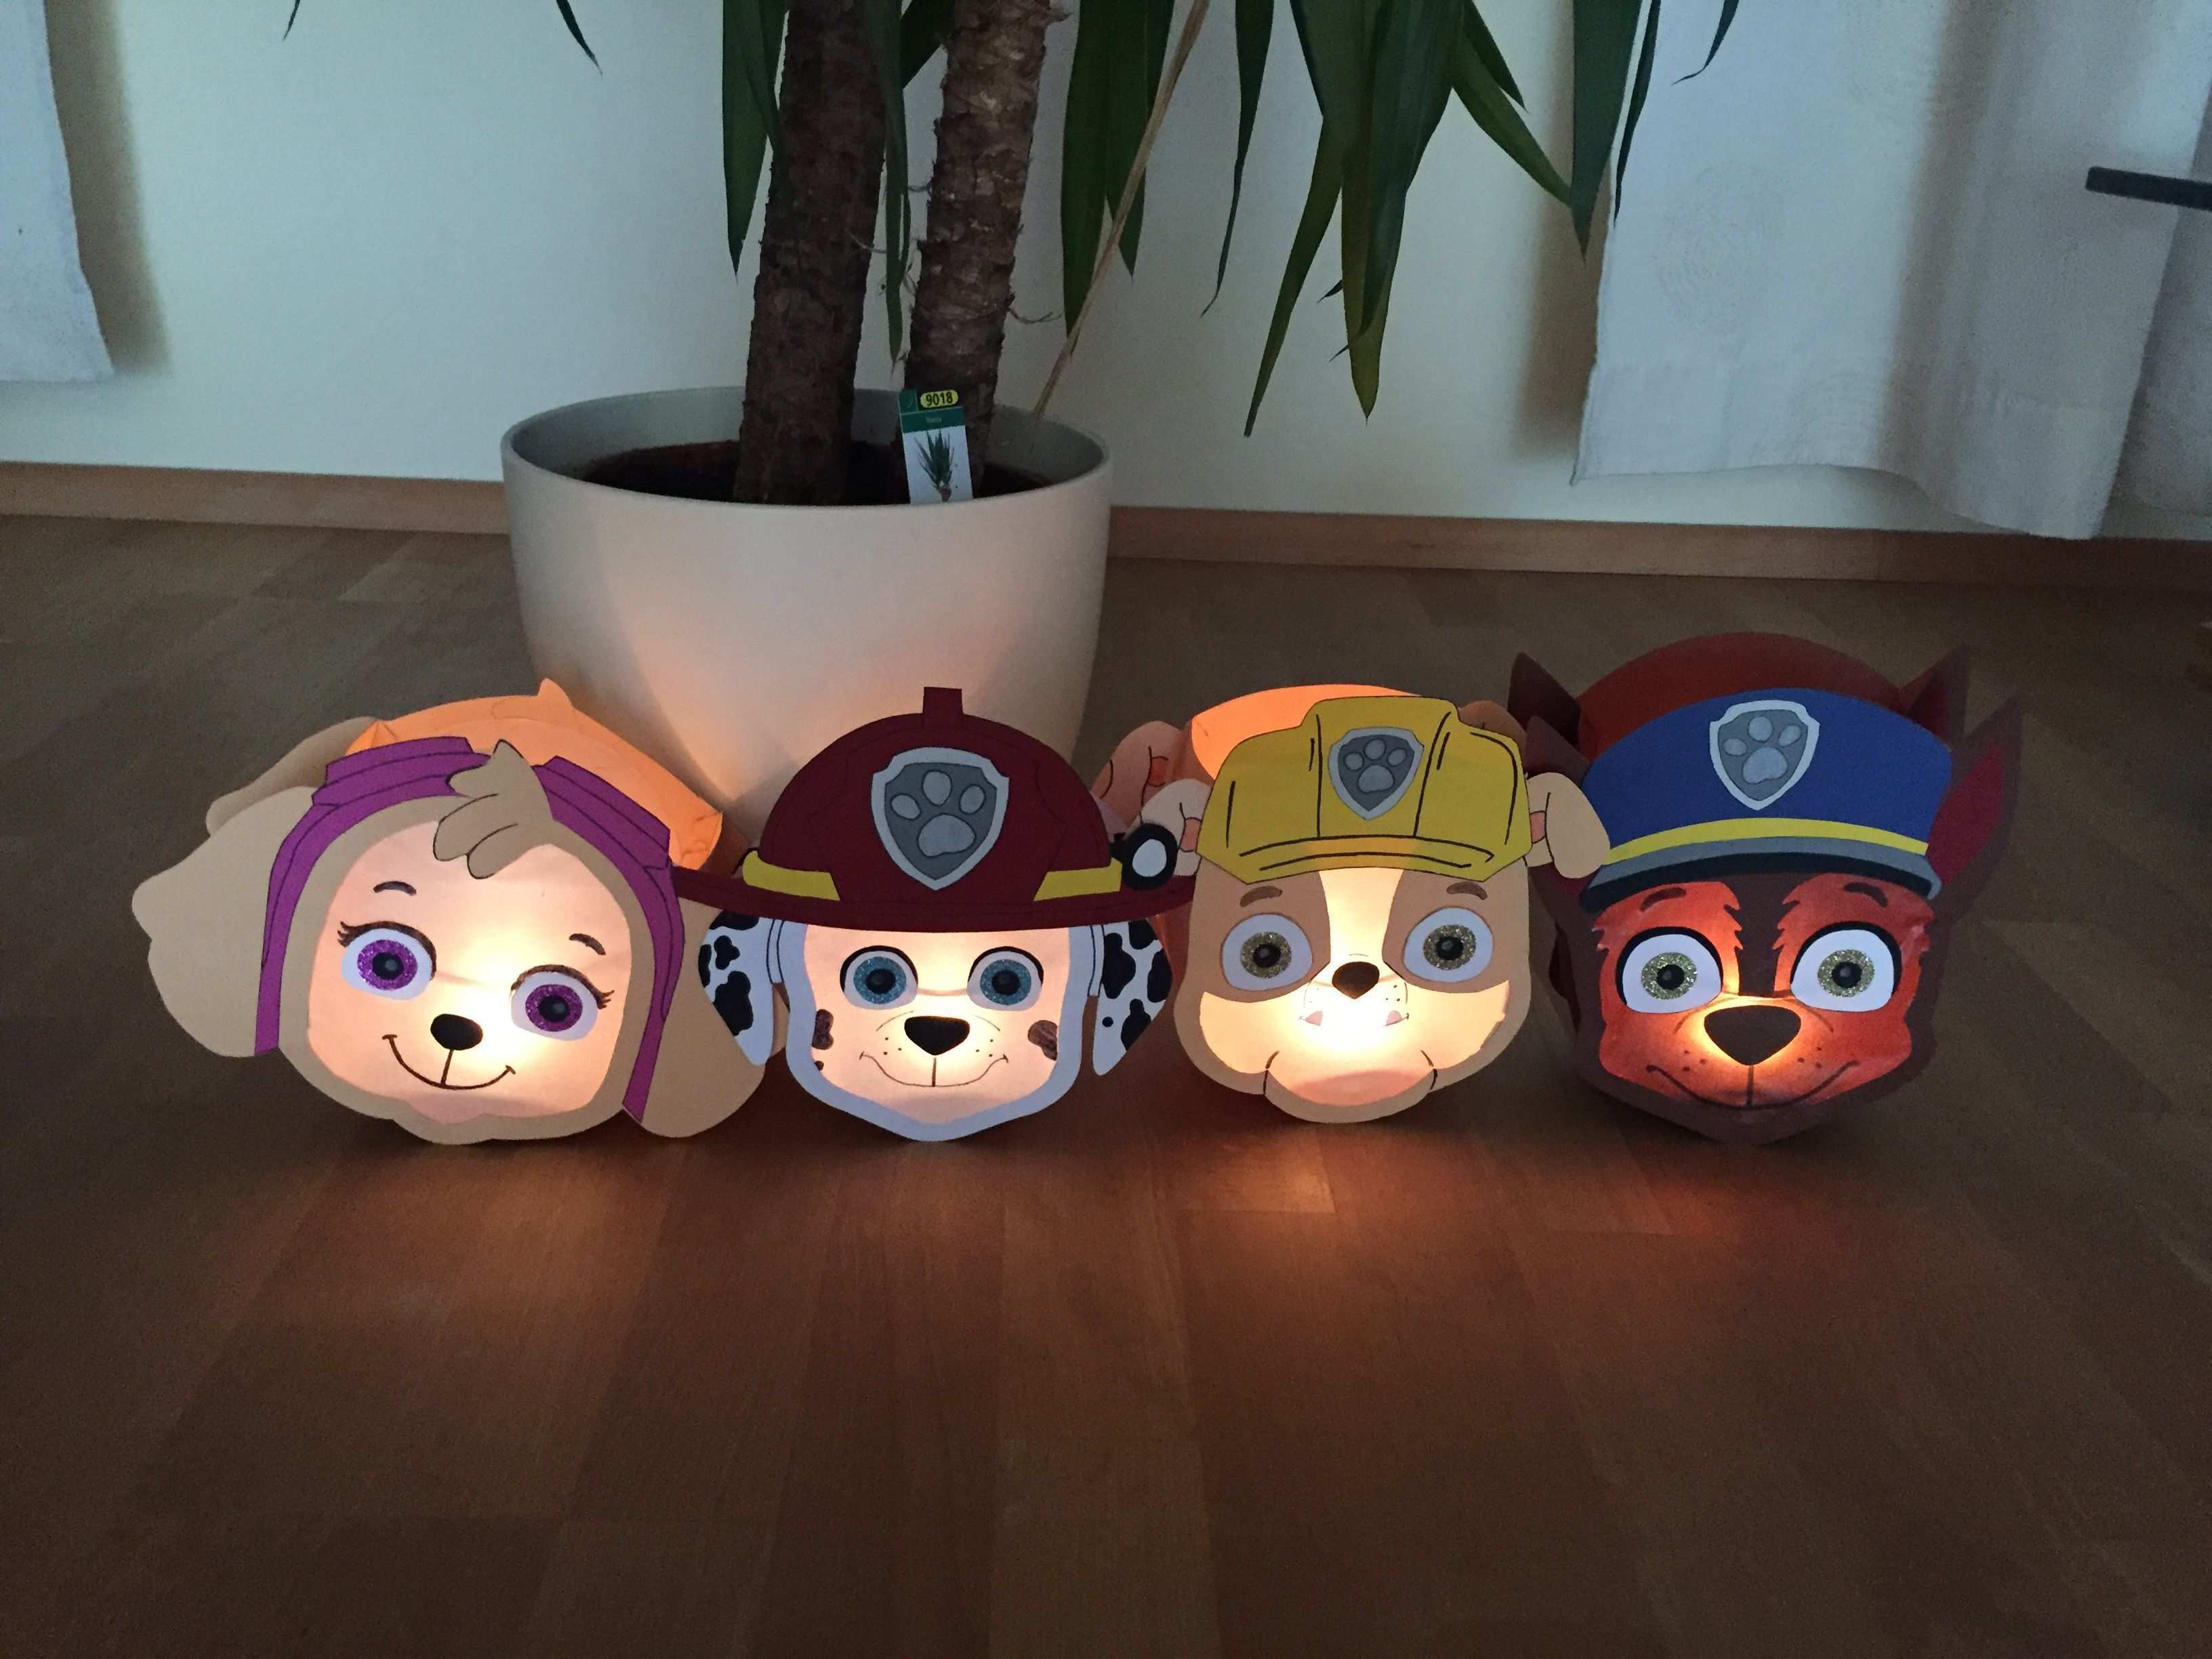 Paw Patrol Laterne Sky Marshall Rubble Chase Kinderleichte Laternen Basteln Laternen Basteln Laterne Basteln Anleitung